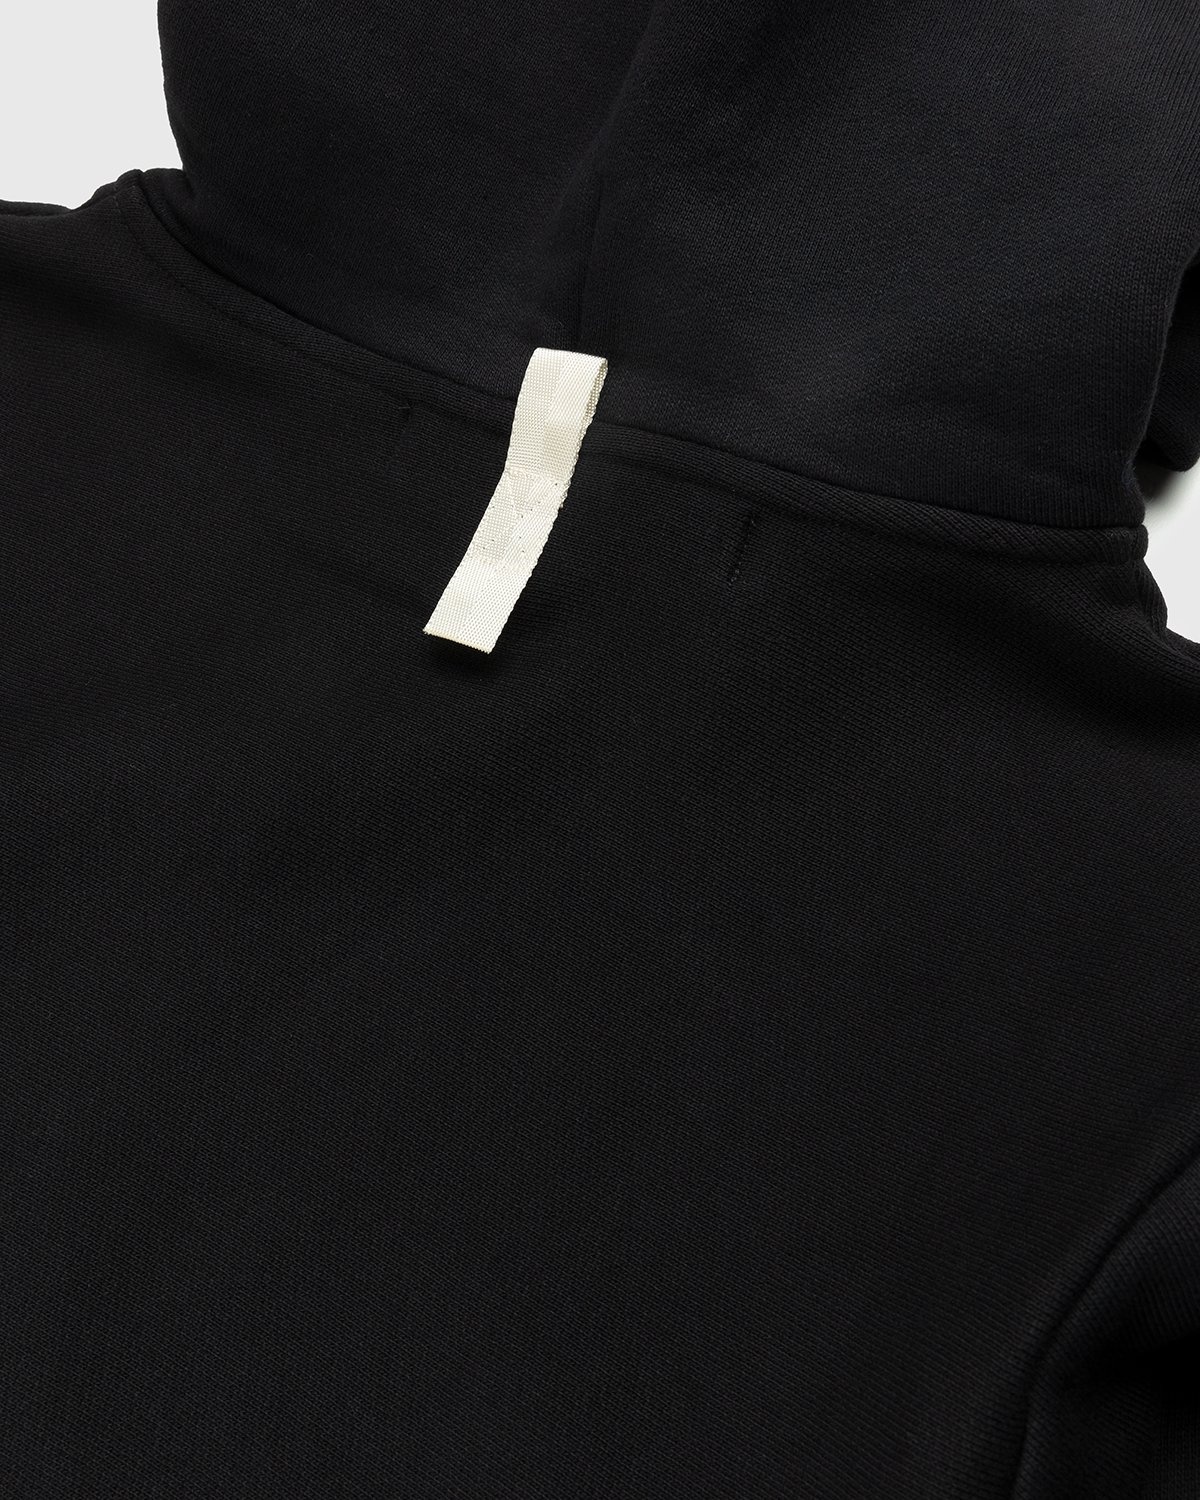 Abc. – Zip-Up French Terry Hoodie Anthracite - Sweats - Black - Image 4